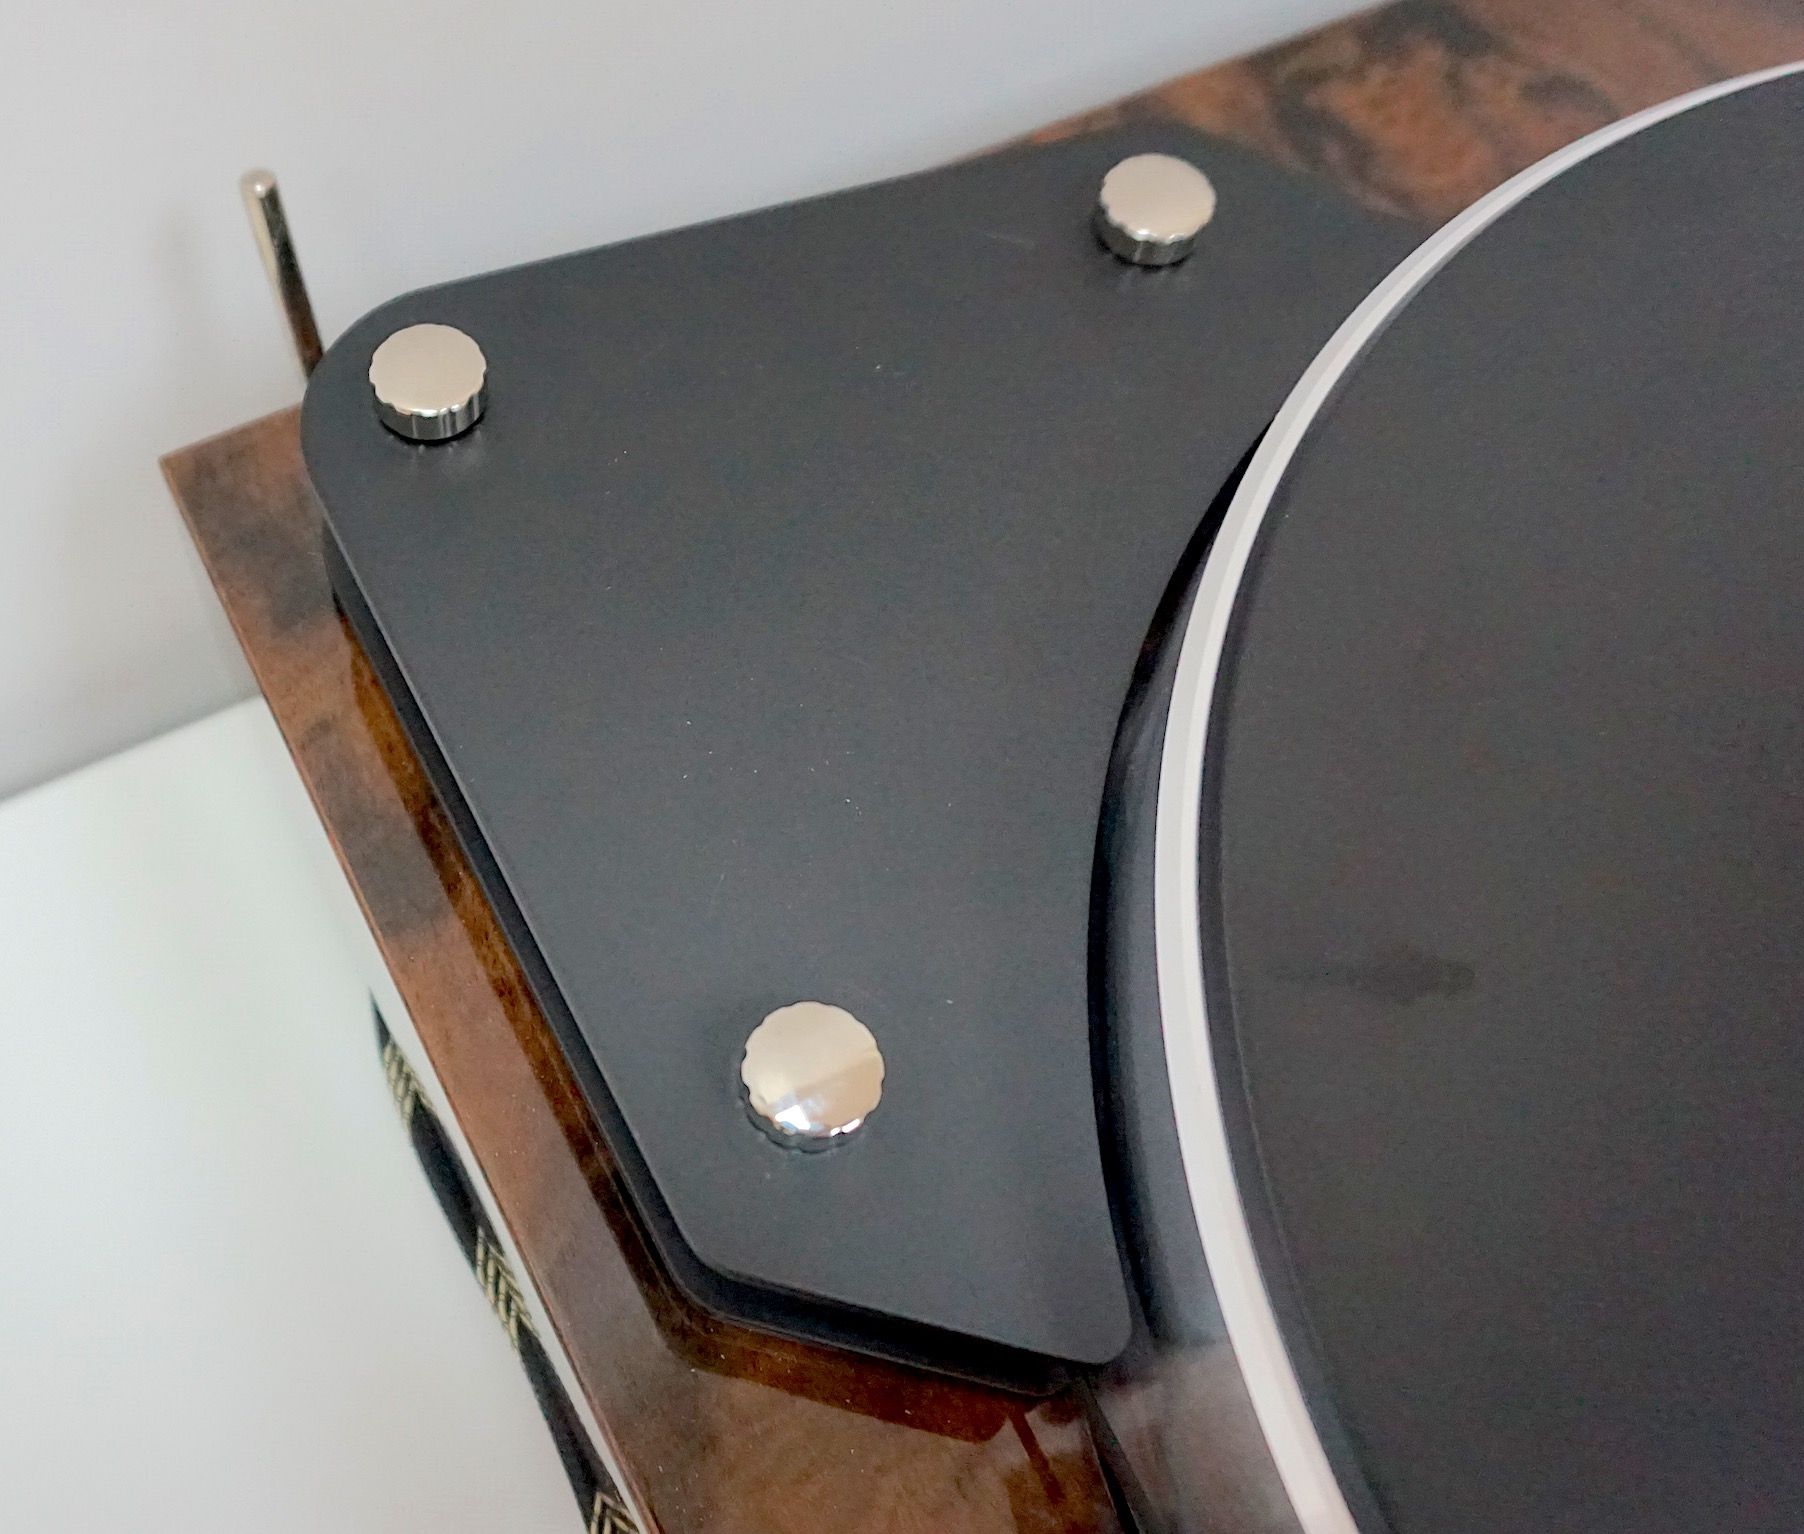 Xtension 10 Turntable From Pro-Ject